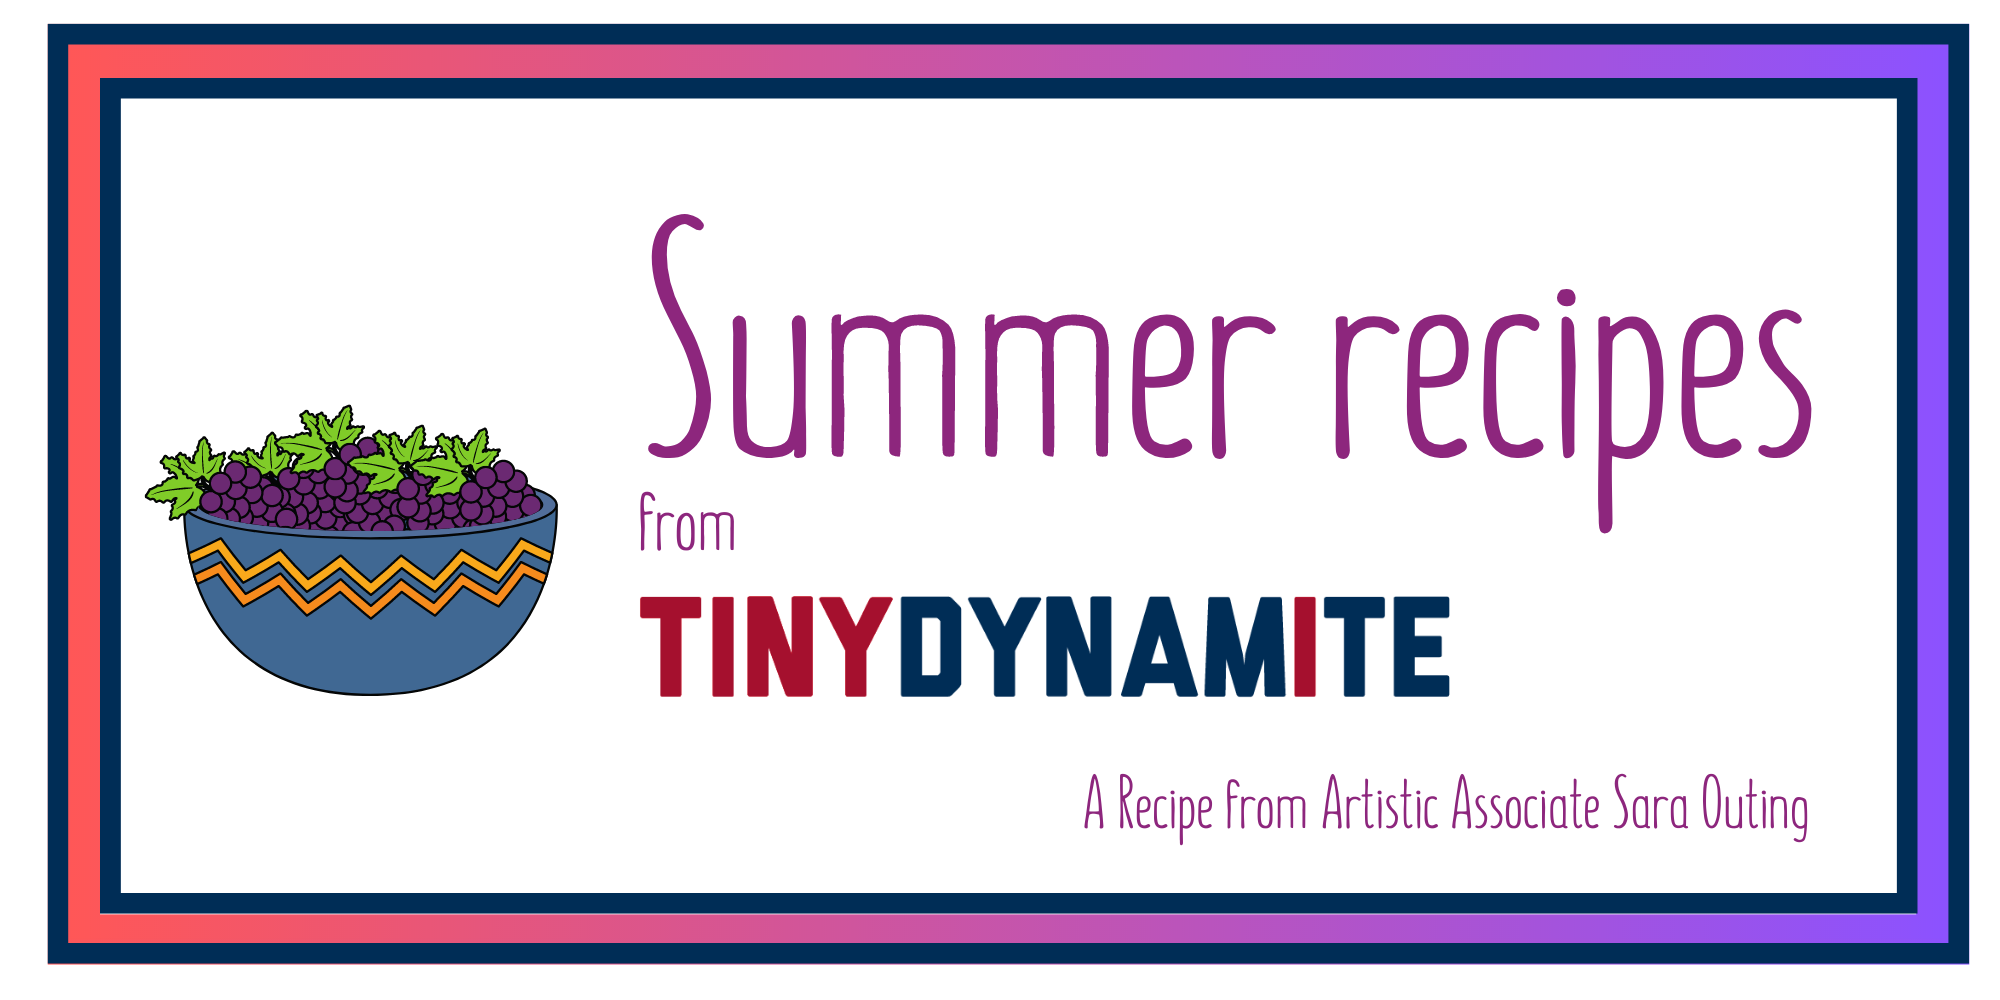 A picture of a bowl of grapes with mint and the text "Summer recipes from Tiny Dynamite; a recipe from Artistic Associate Sara Outing"